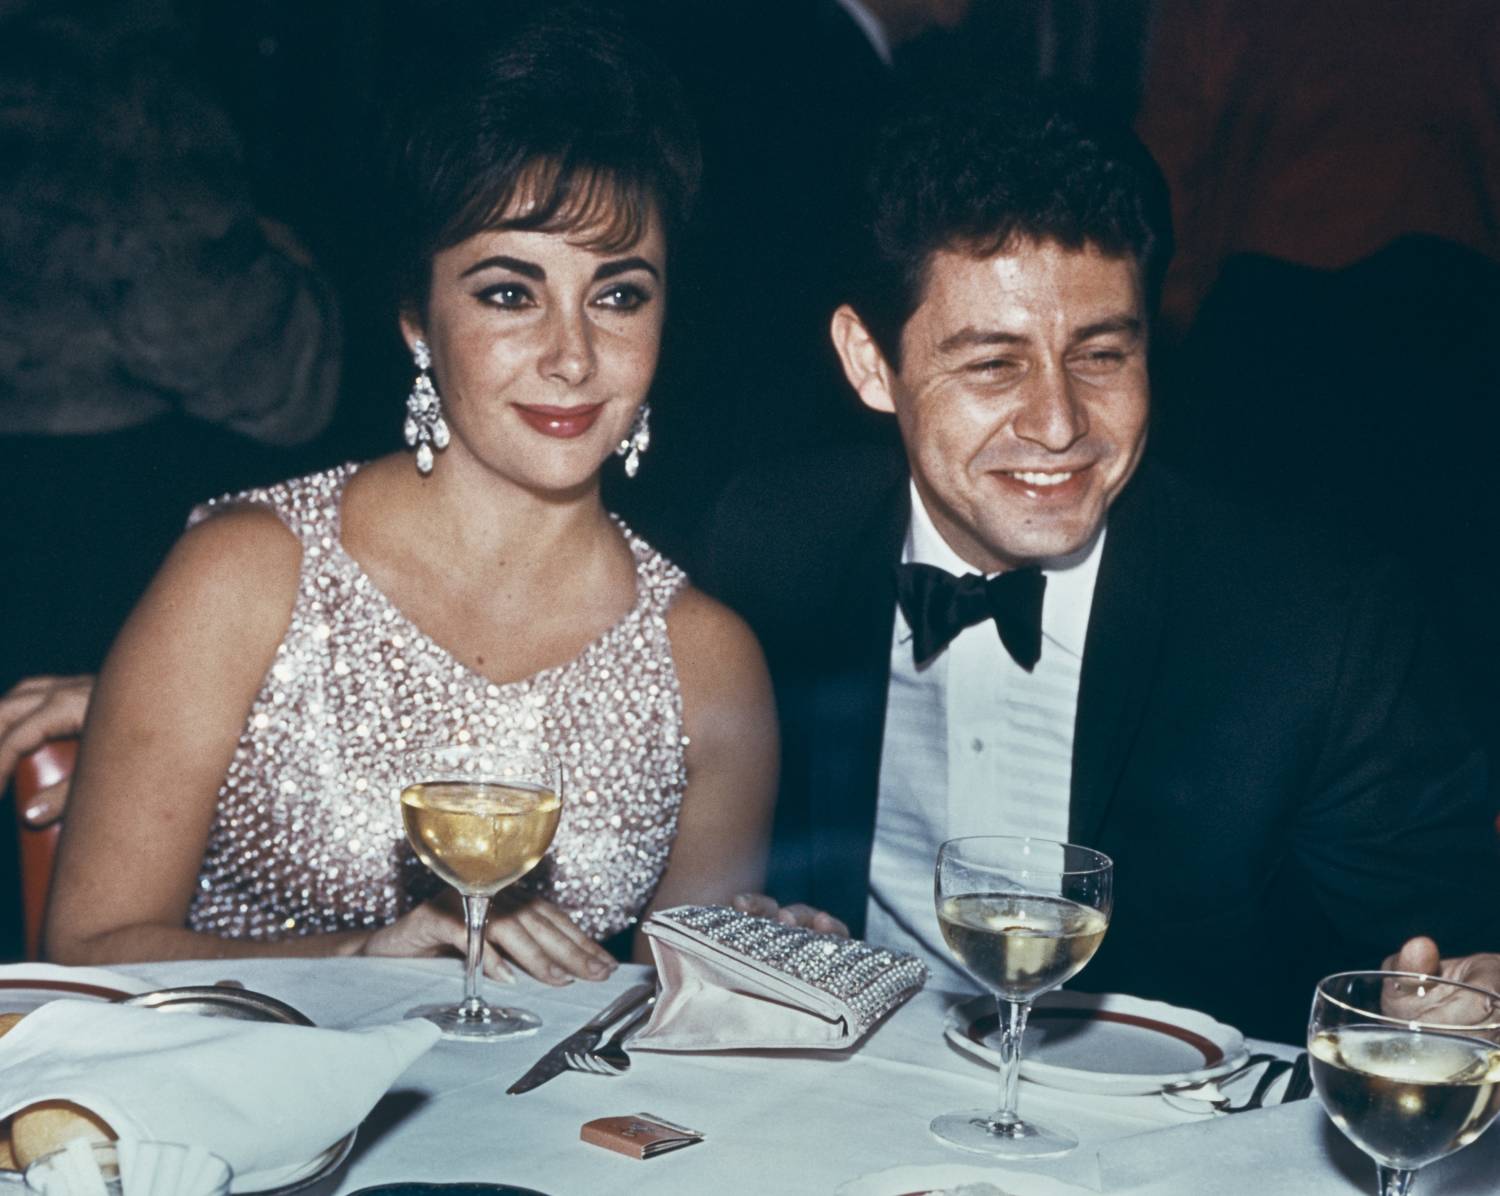 Elizabeth Taylor and Eddie Fisher dining at an event, circa 1959. Taylor wears a silver beaded dress. 